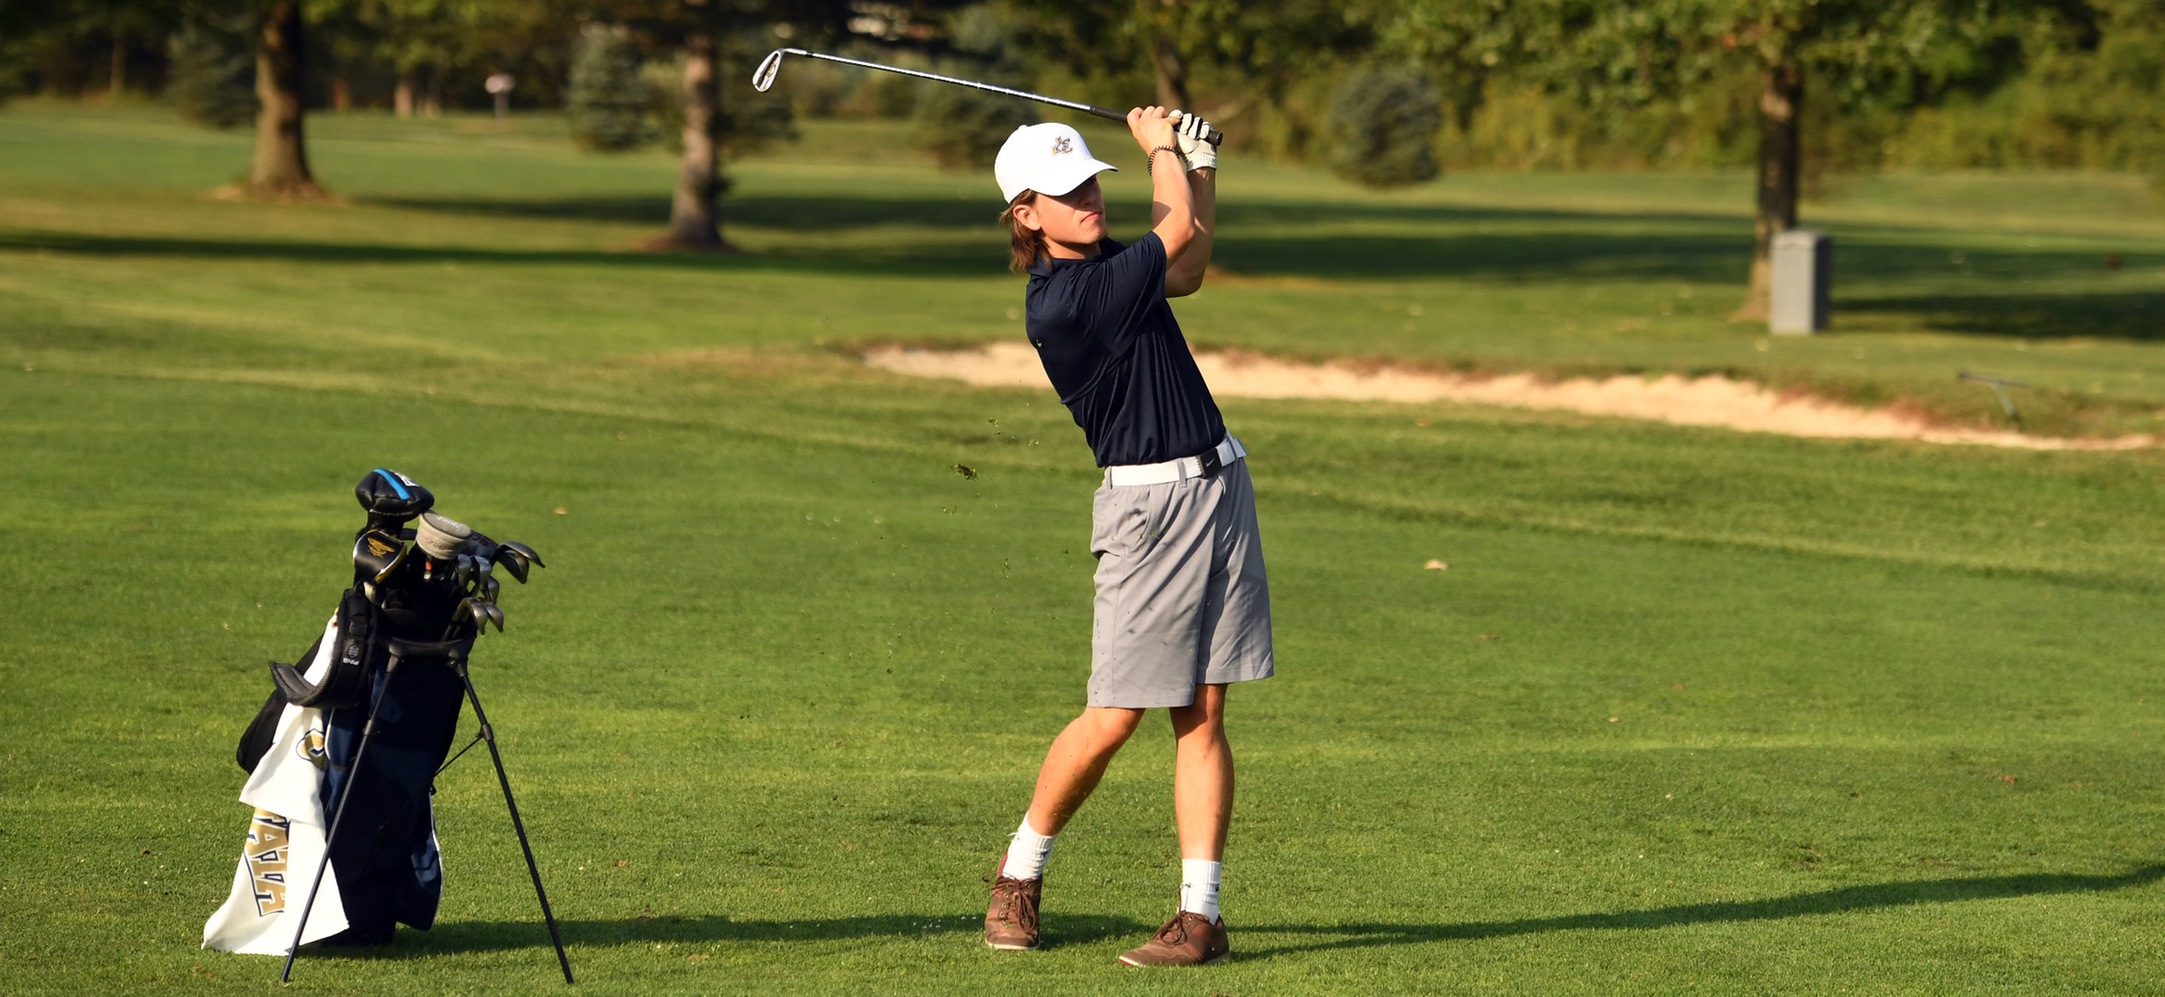 Men's Golf Competes at Gettysburg Fall Invitational